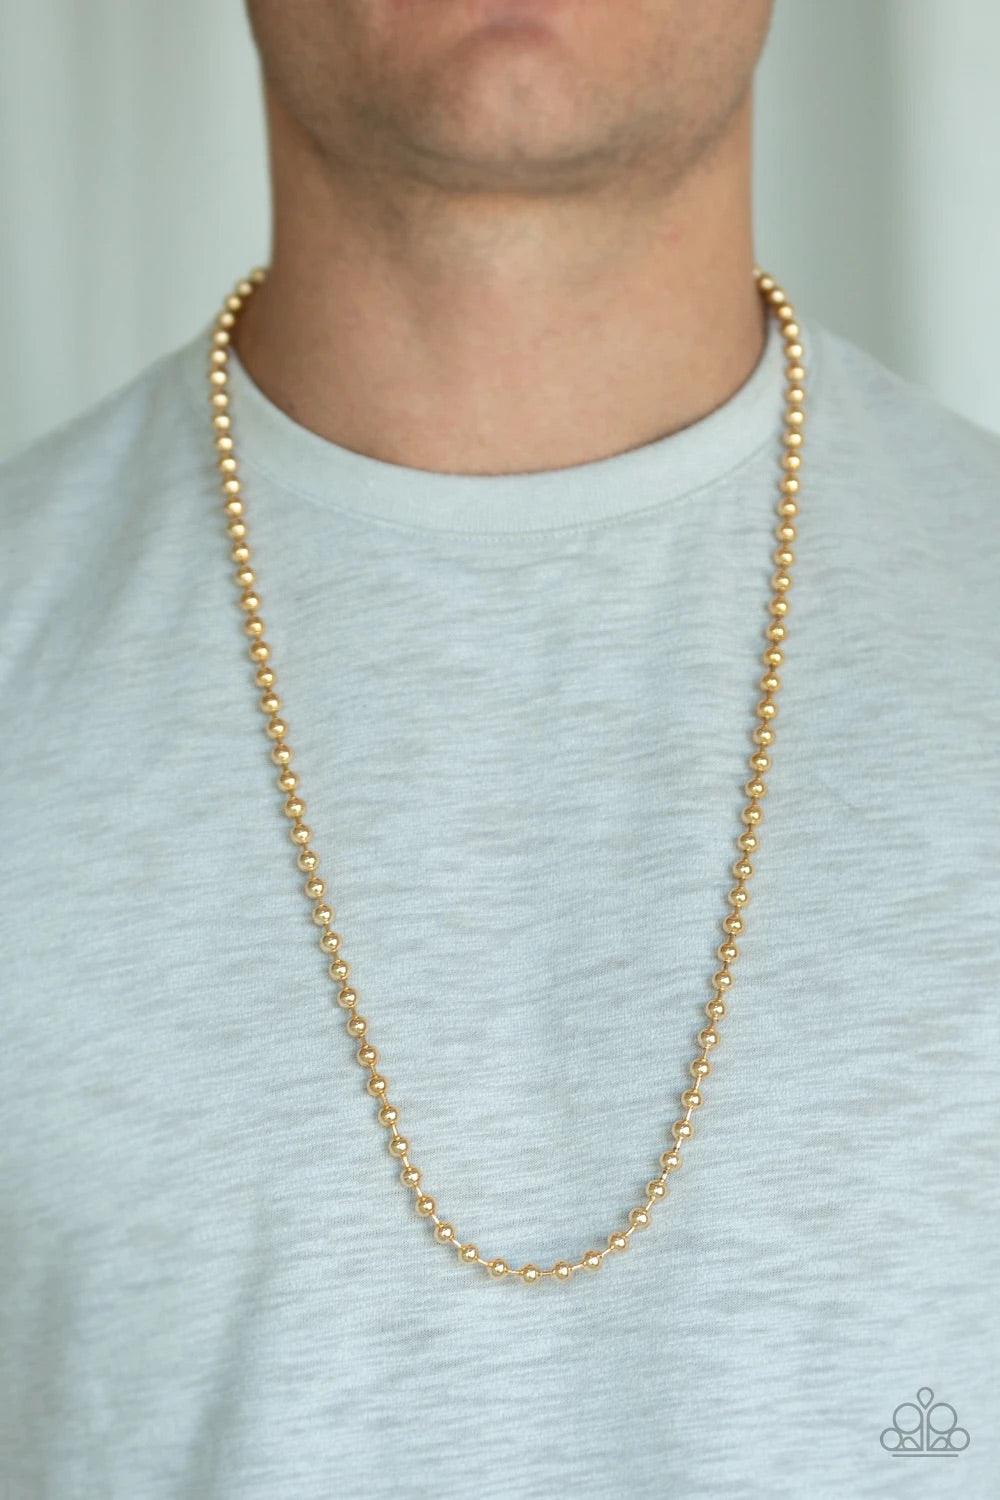 Paparazzi Accessories Cadet Casual - Gold A dainty strand of gold ball chain drapes across the chest for a causal look. Features an adjustable ball chain connector. Sold as one individual necklace. Jewelry